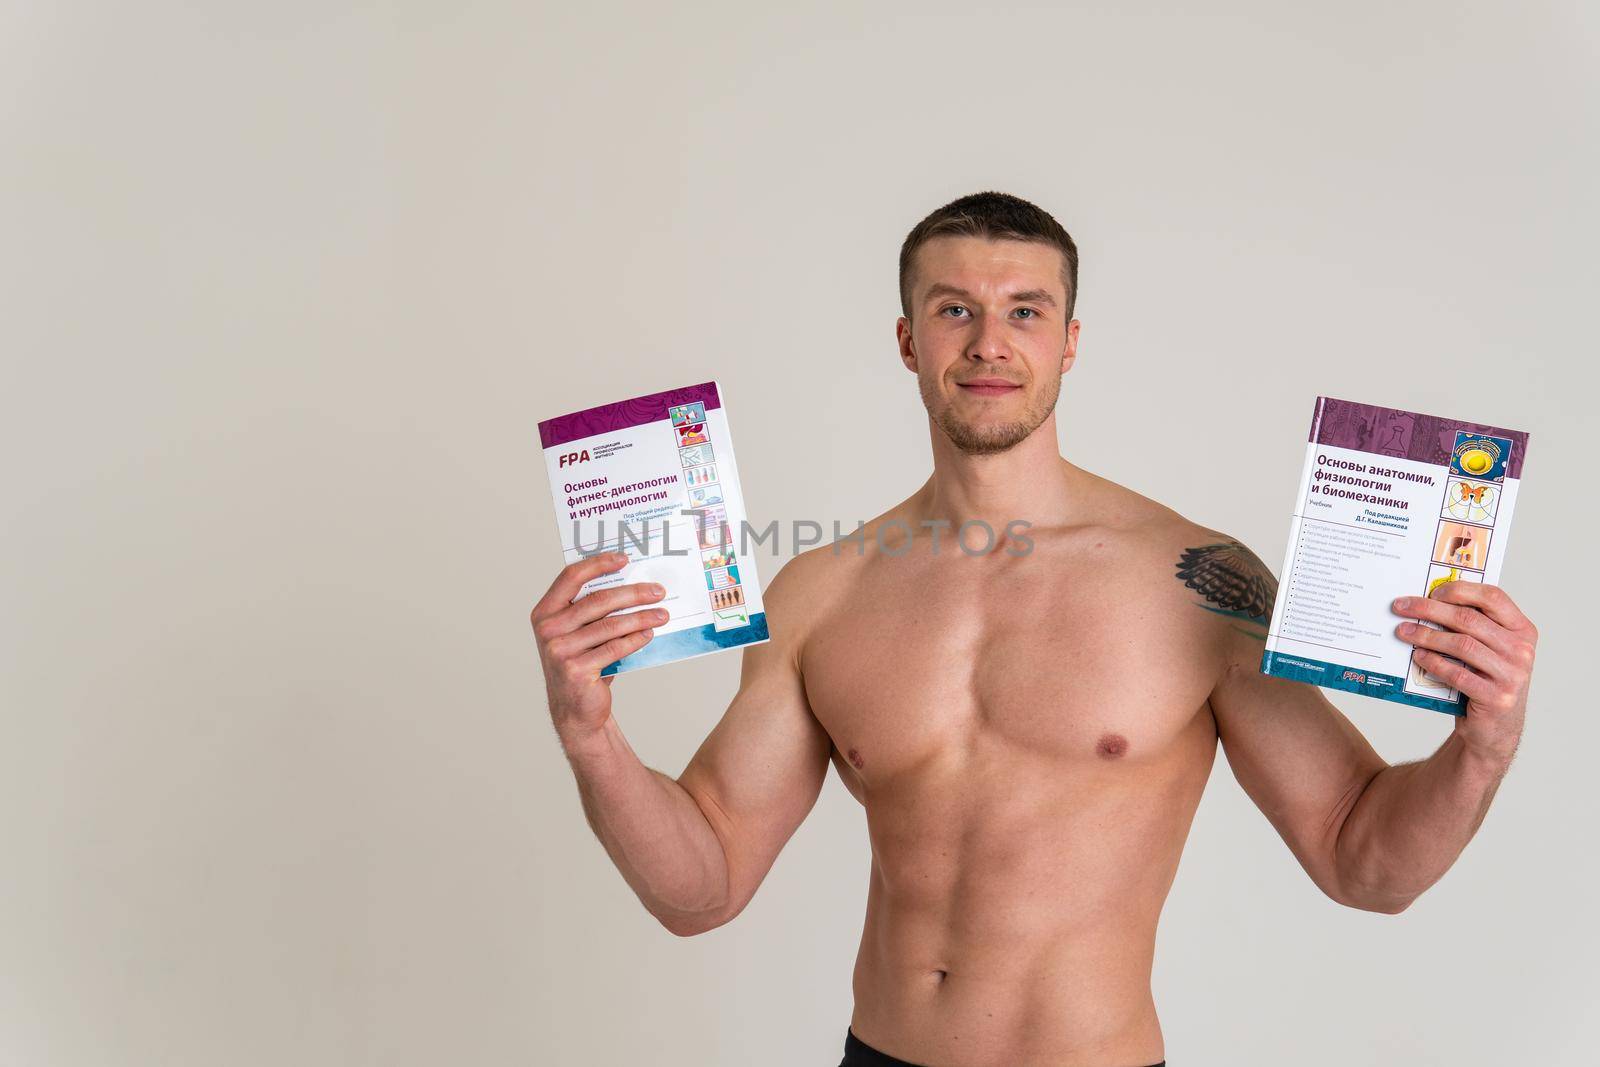 Bodybuilder reads the book on a white background isolated at the bottom of his head on his hands bodybuilder book macho, muscle fitness person chest intellectual Smile ABS gym, vision tan